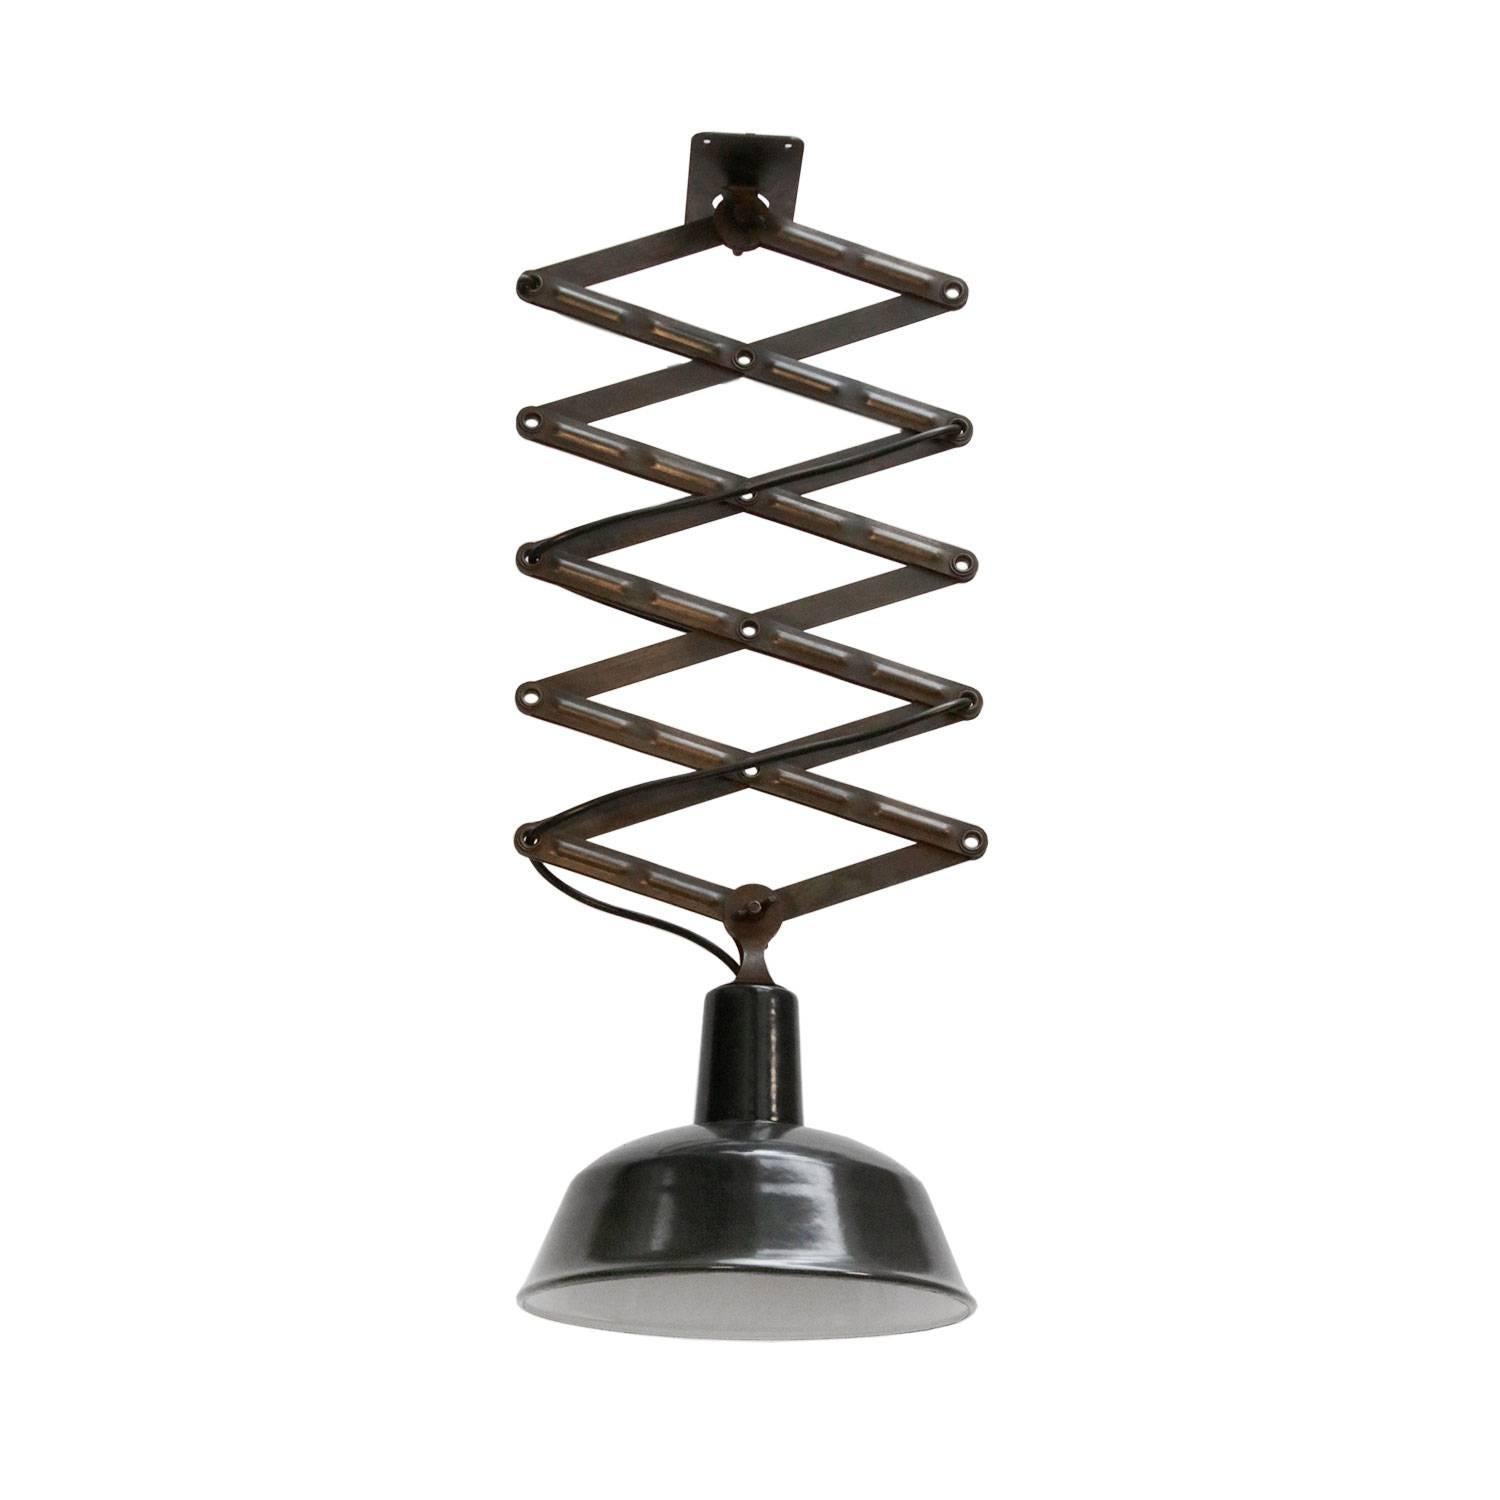 Scissor varia steel pendant.
Black enamel. White interior. Mounting plate: 12 × 7 cm.

Weight: 2.7 kg / 6 lb

All lamps have been made suitable by international standards for incandescent light bulbs, energy-efficient and LED bulbs. E26/E27 bulb